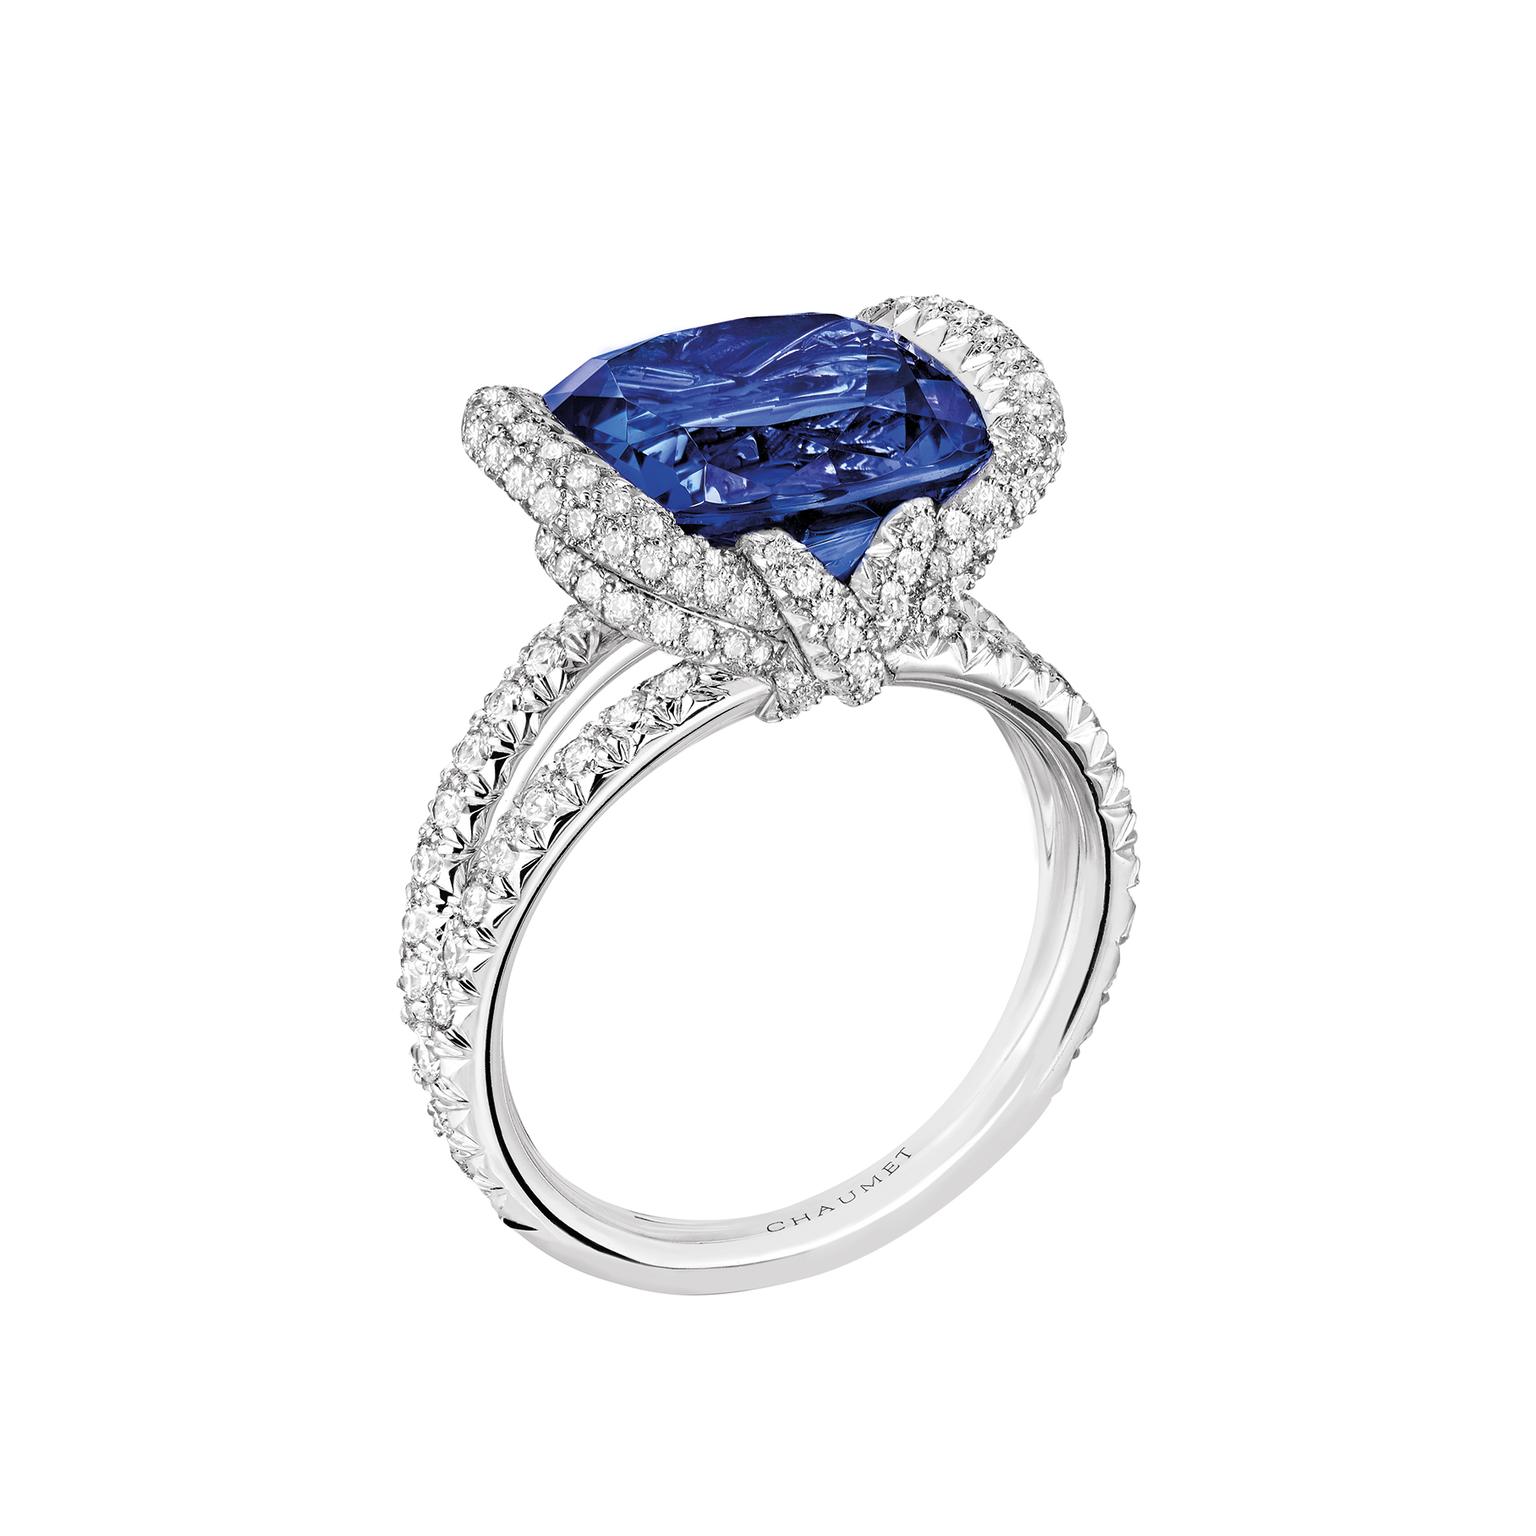 Chaumet Liens d'Amour sapphire ring